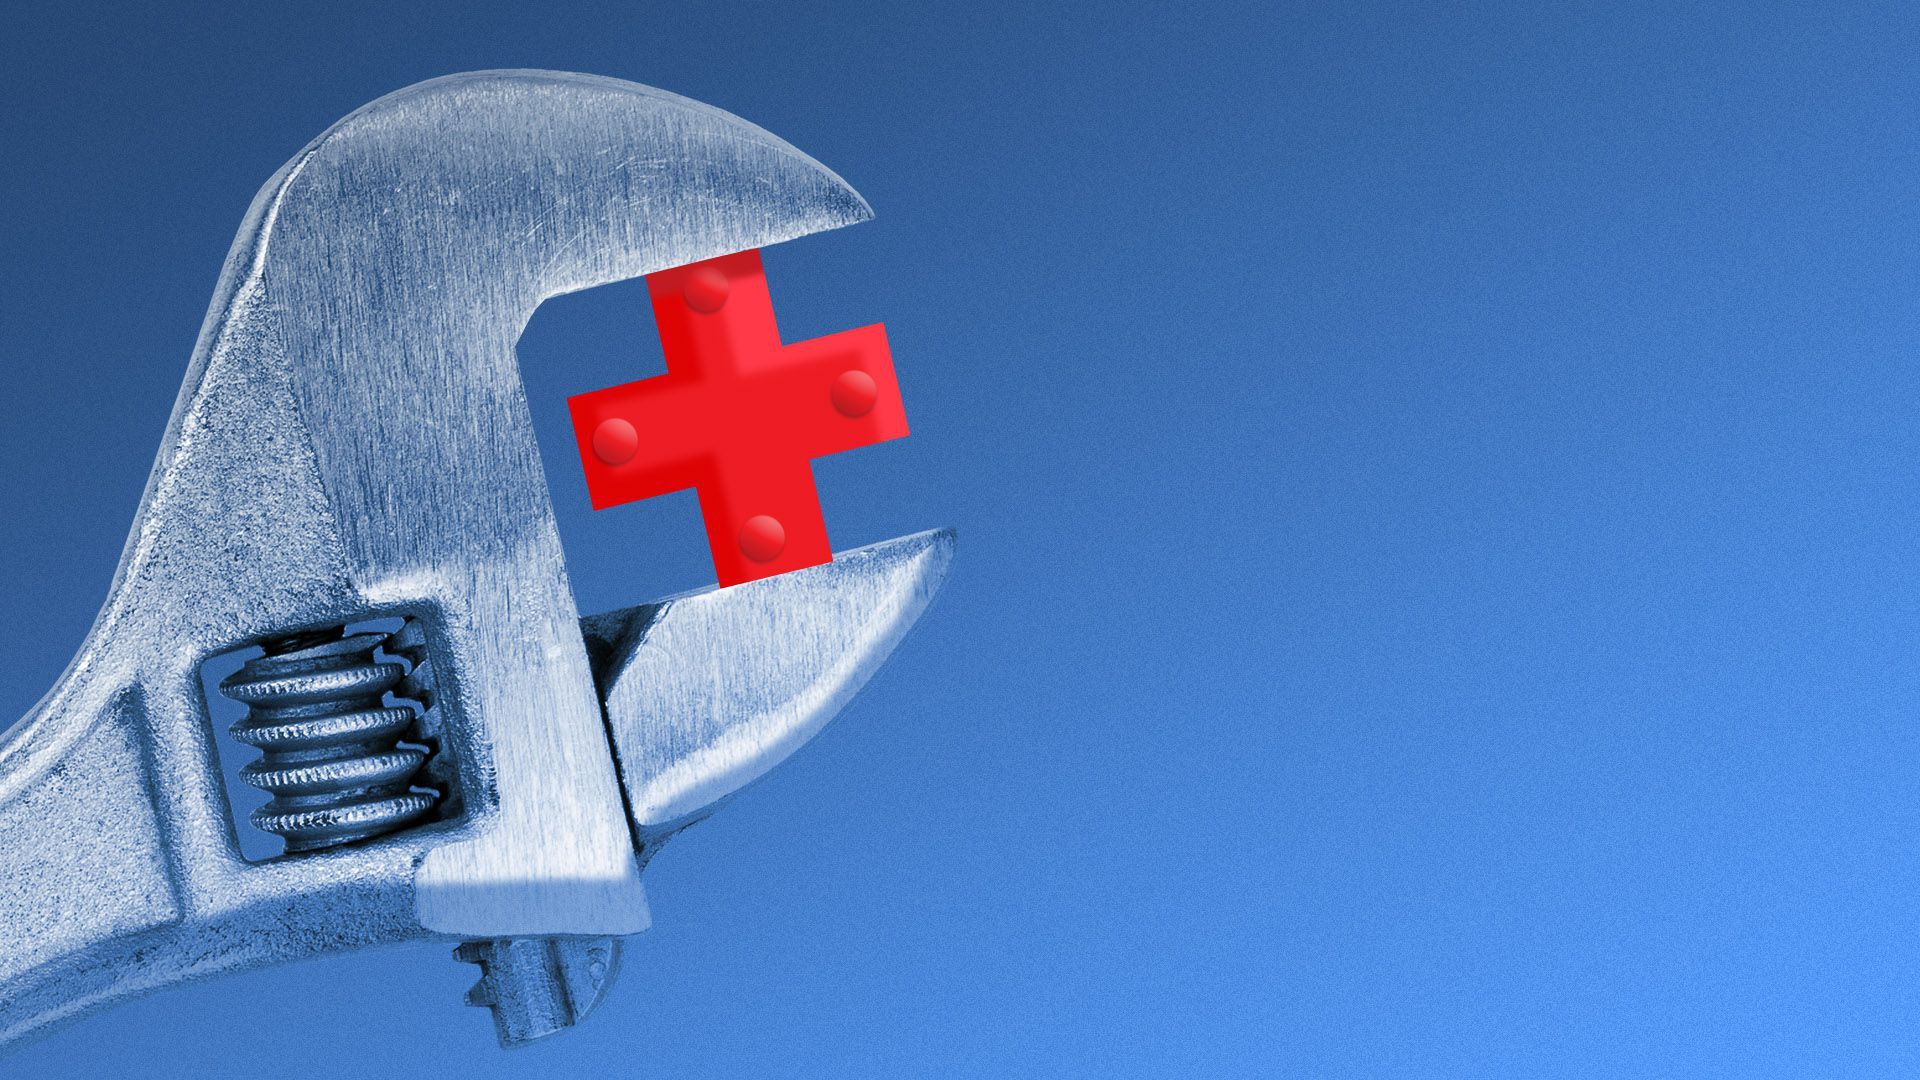 Illustration of a wrench holding a red cross